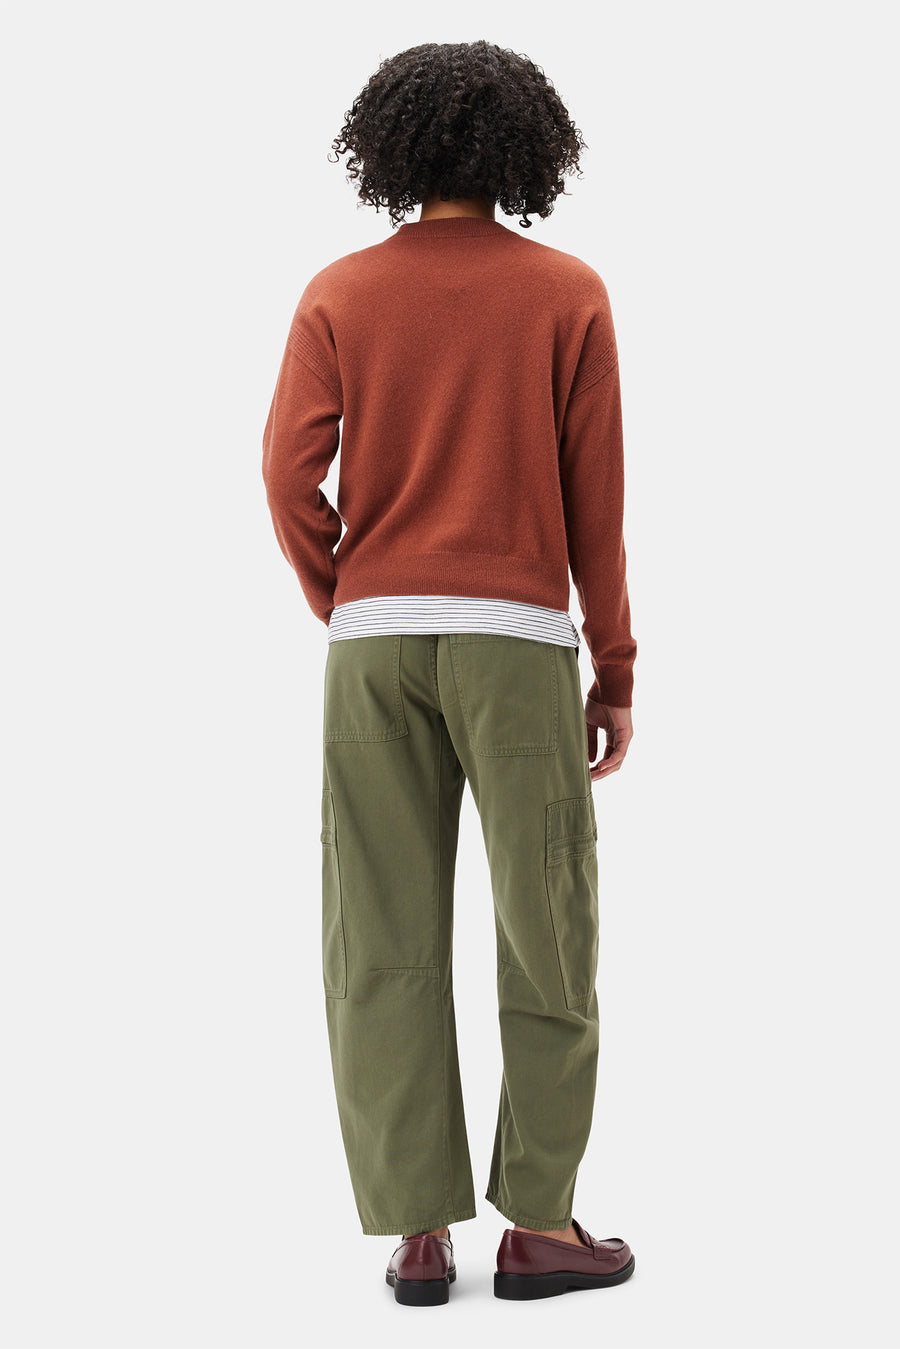 Pearl Cashmere Sweater - Redwood